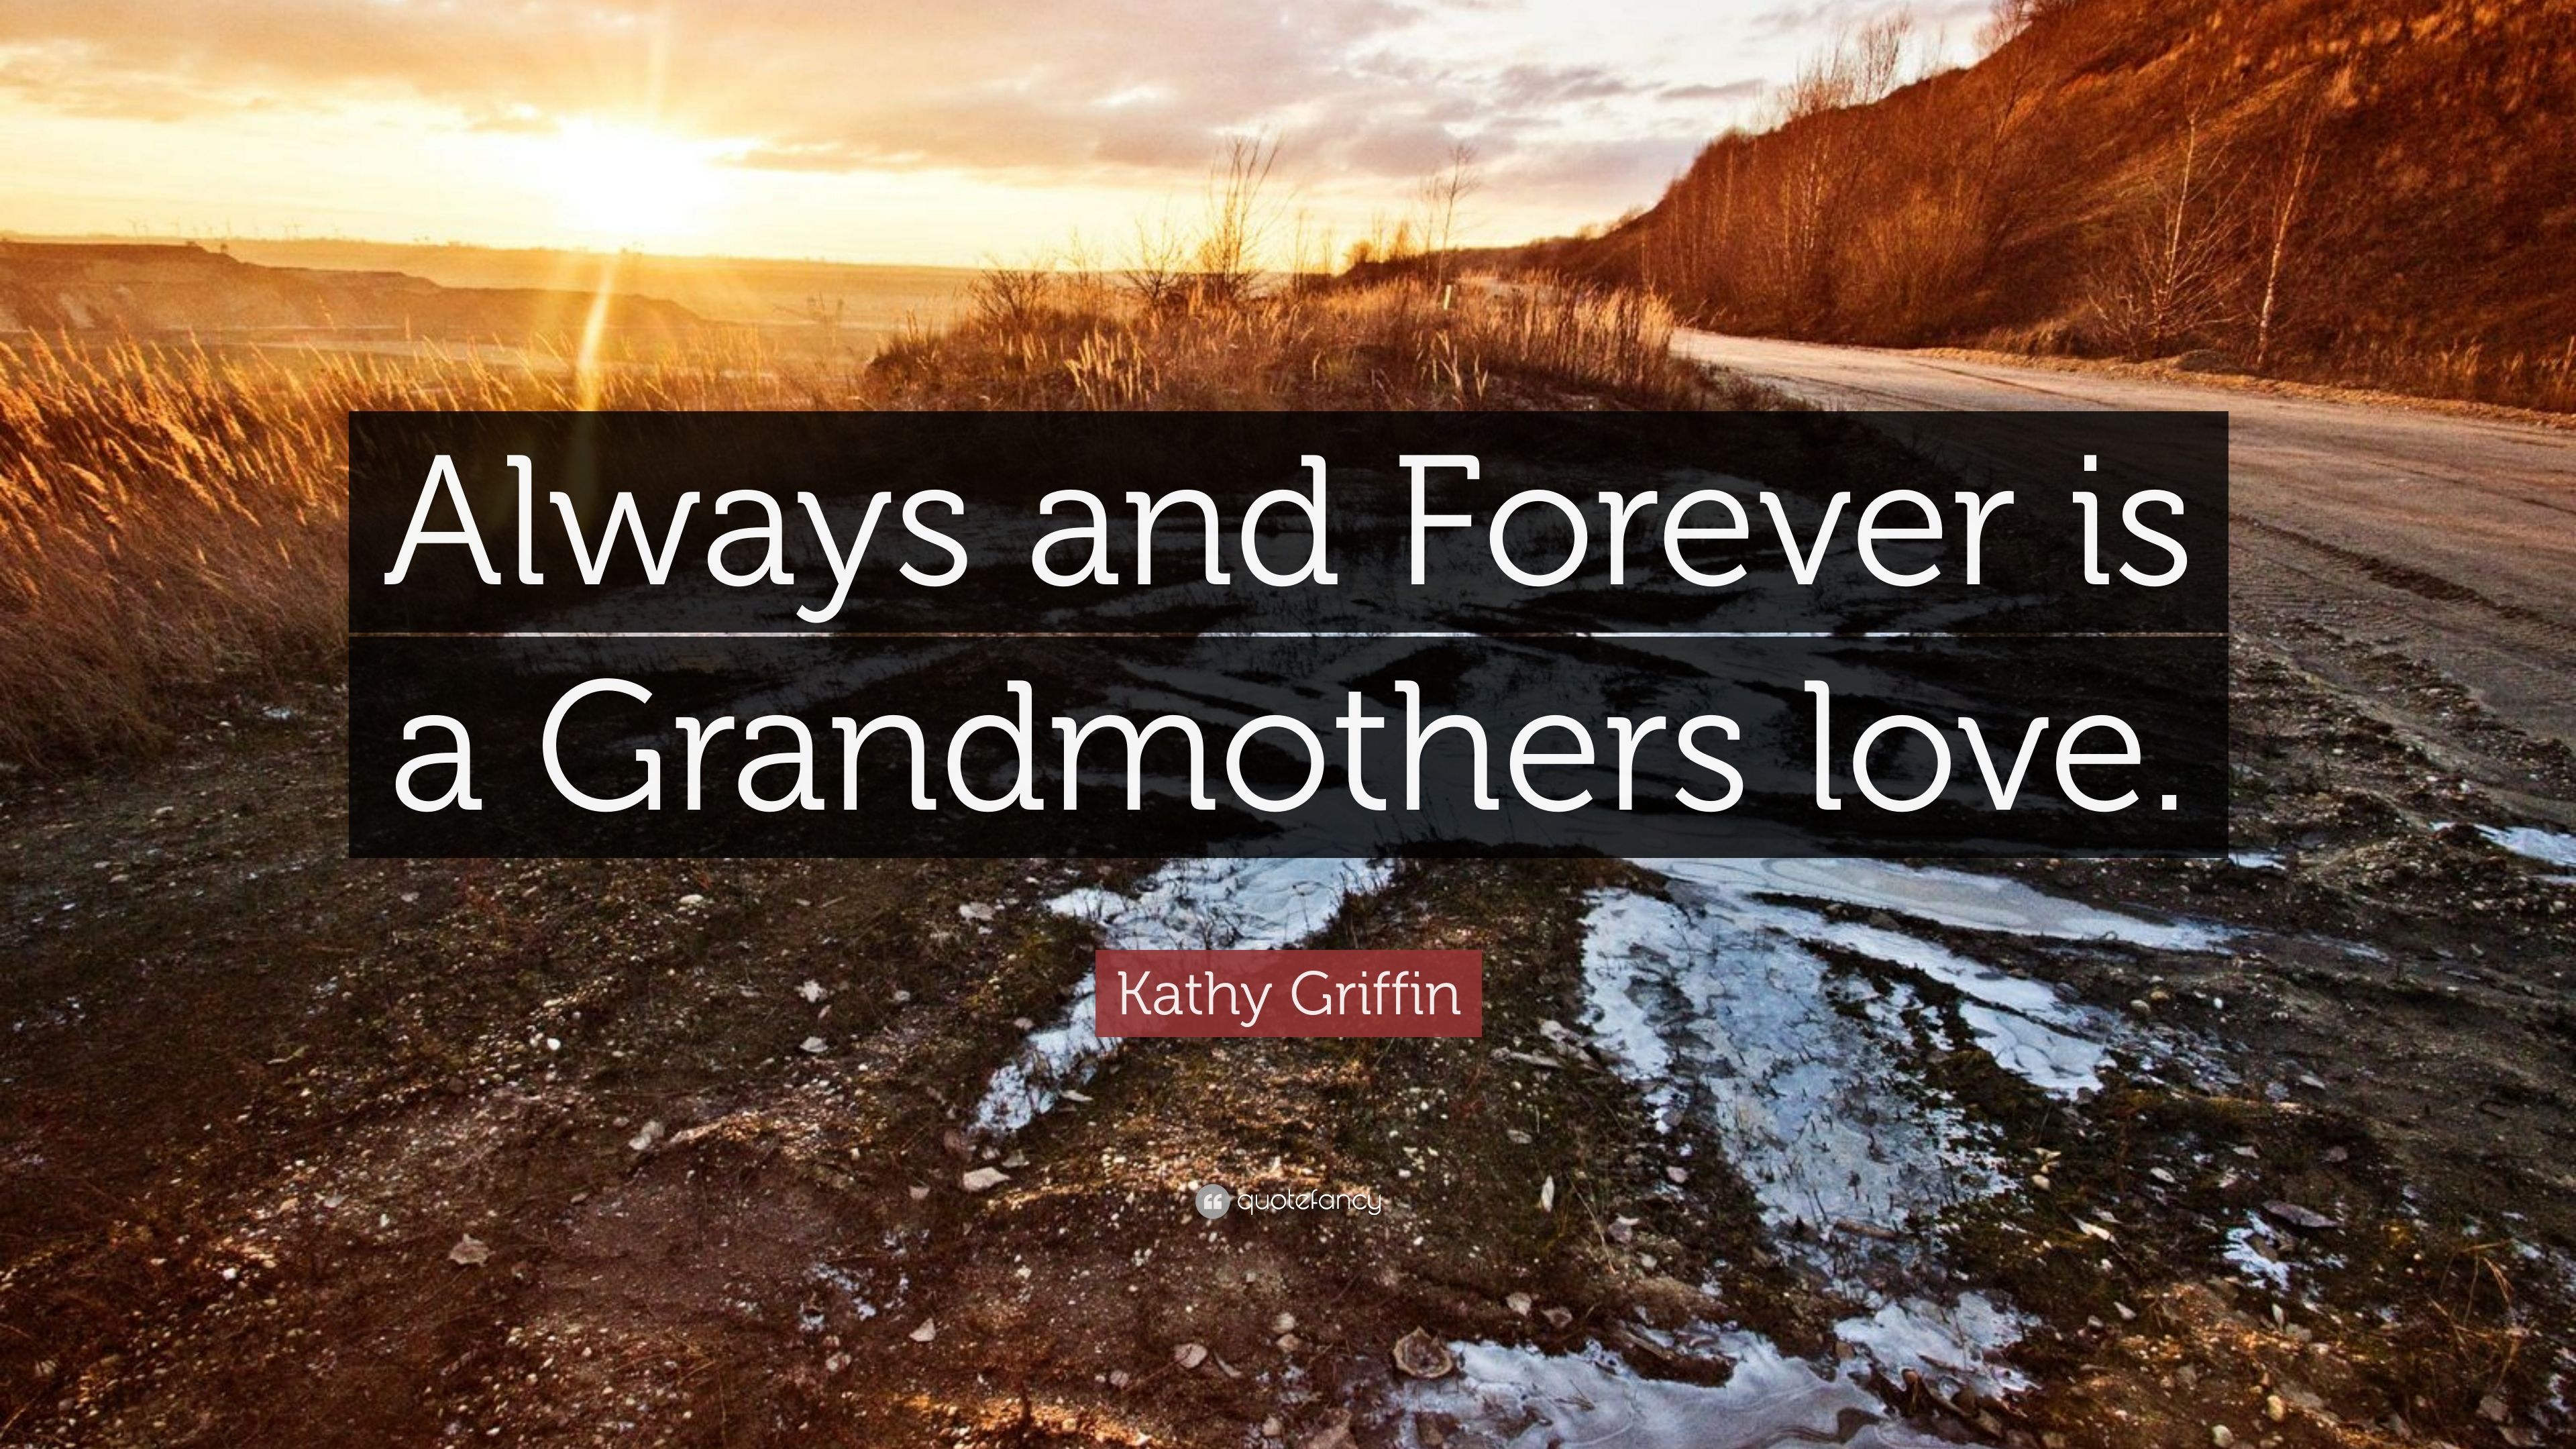 Kathy Griffin Quote: “Always and Forever is a Grandmothers love